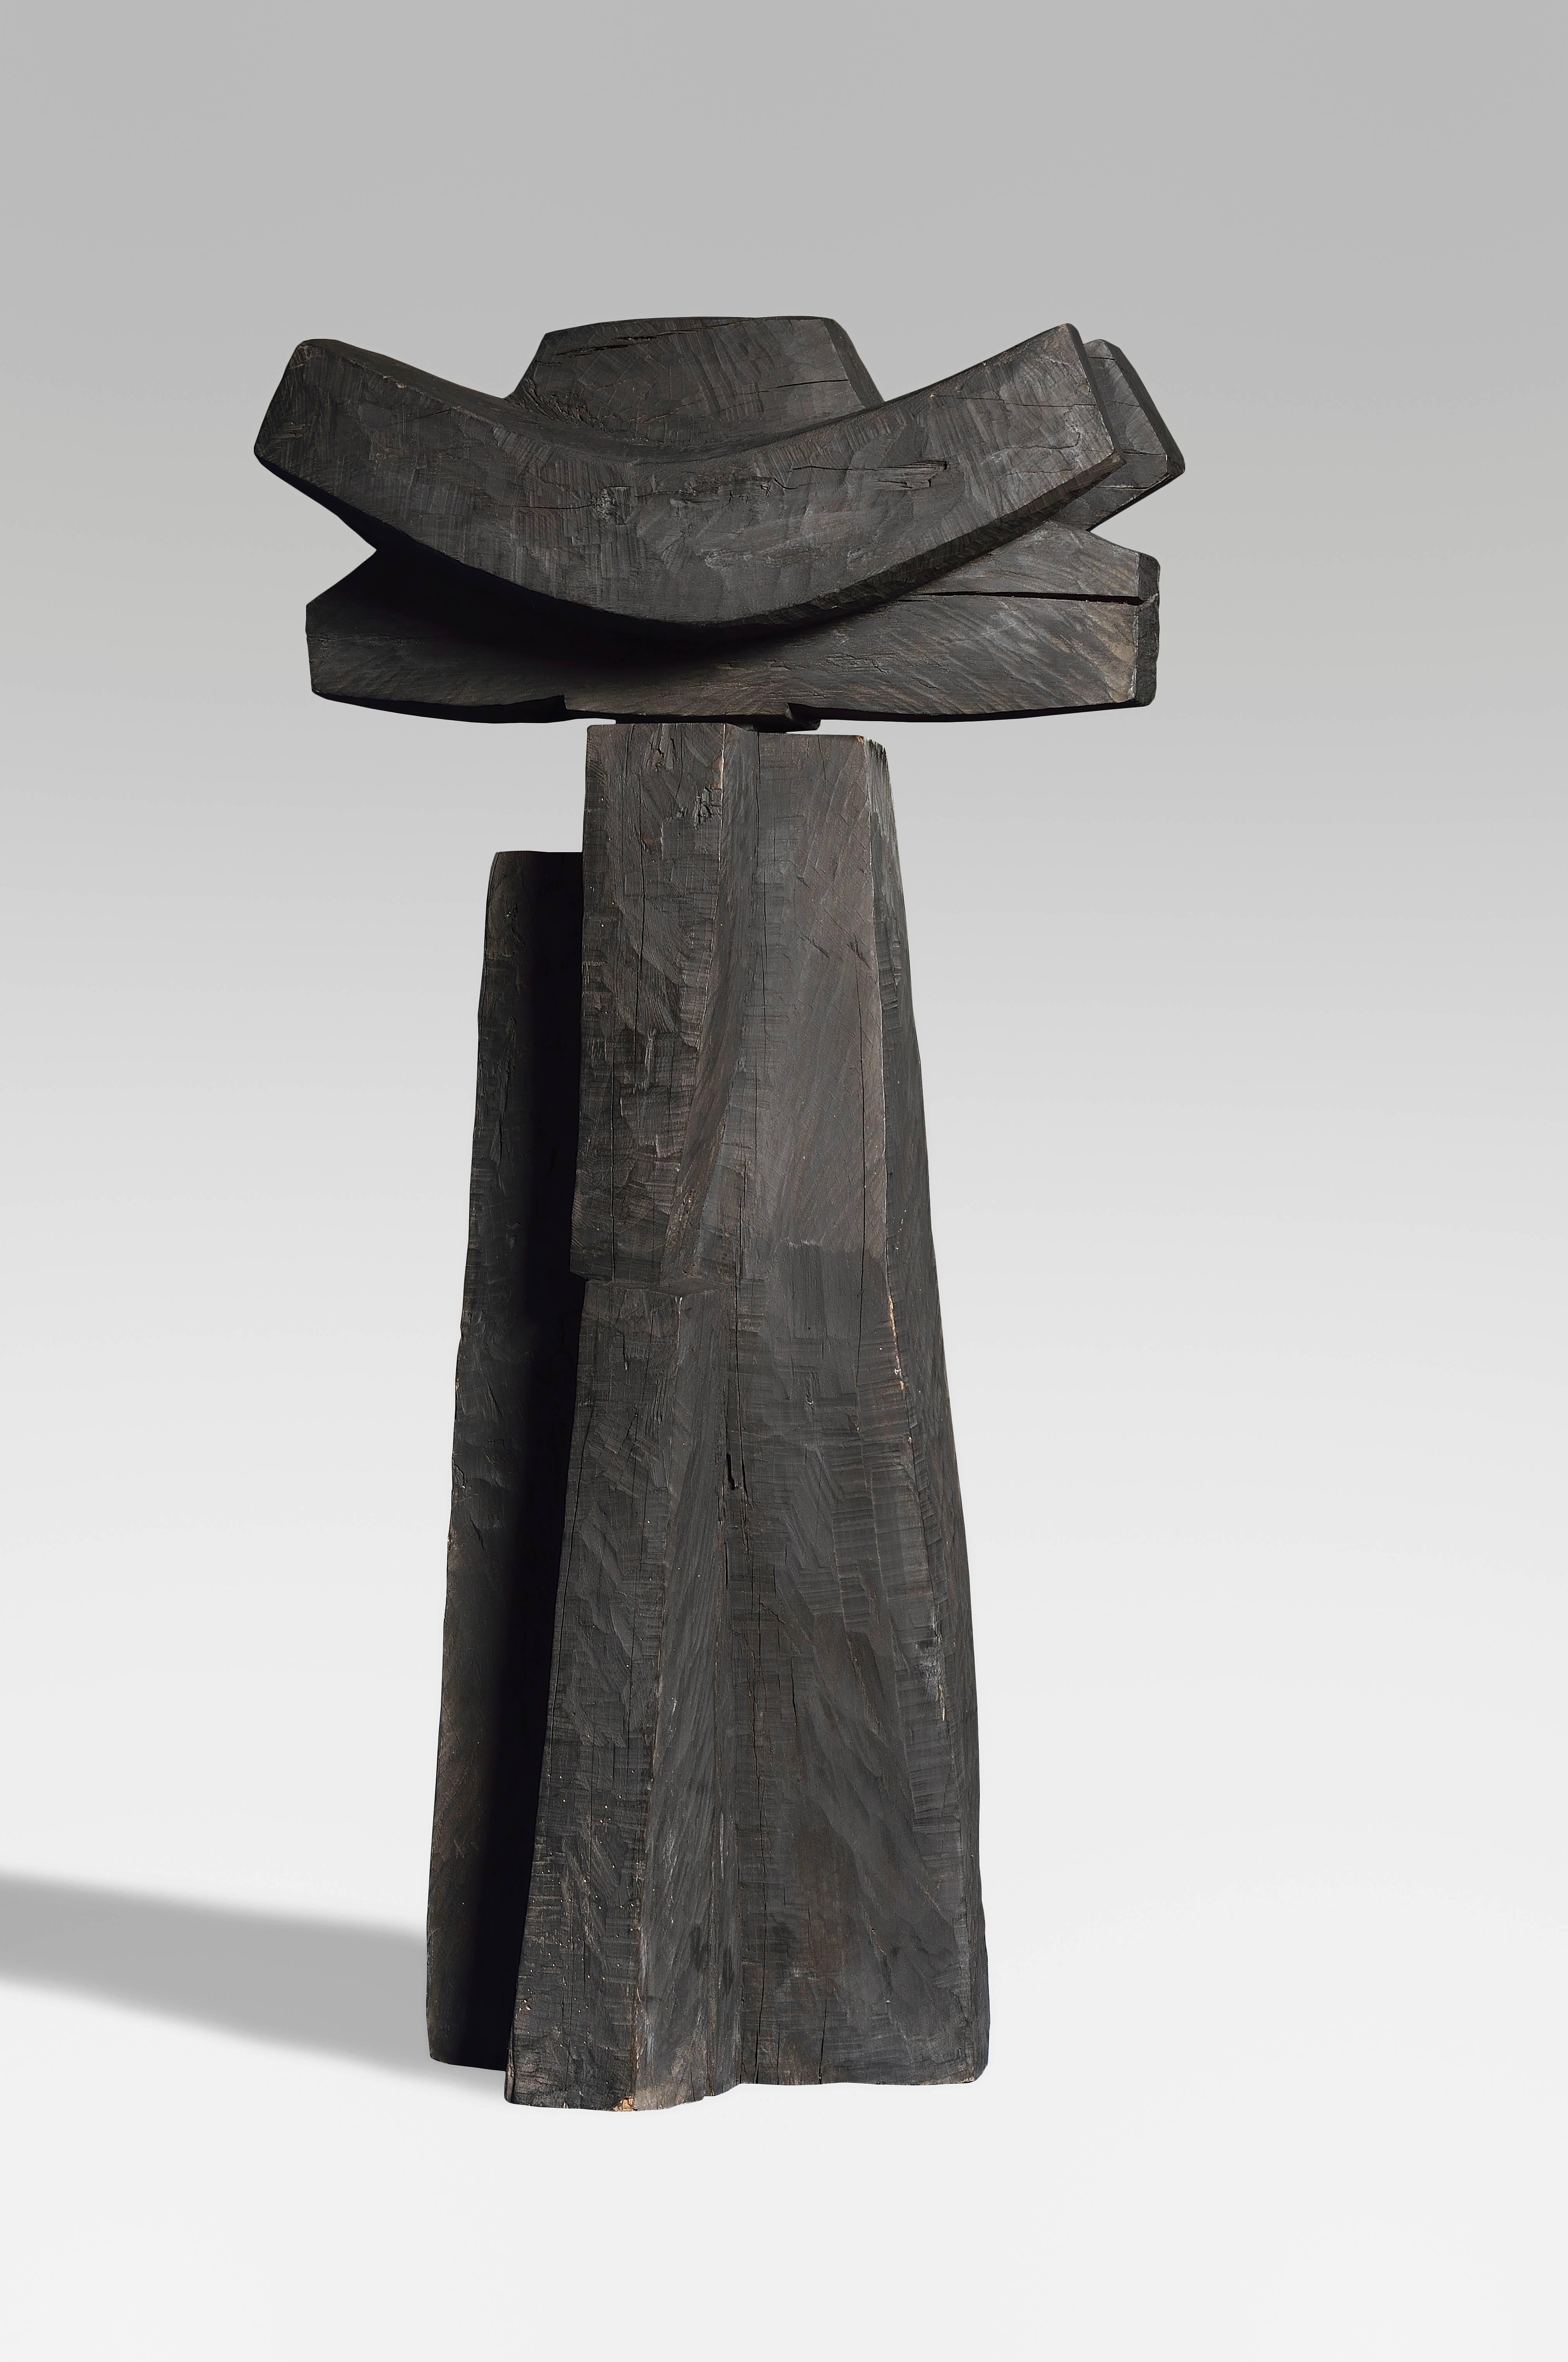 Totem by Oehm Dieter
Charred Wood Sculpture
circa 1970

Note : The sculpture is made with two parts.